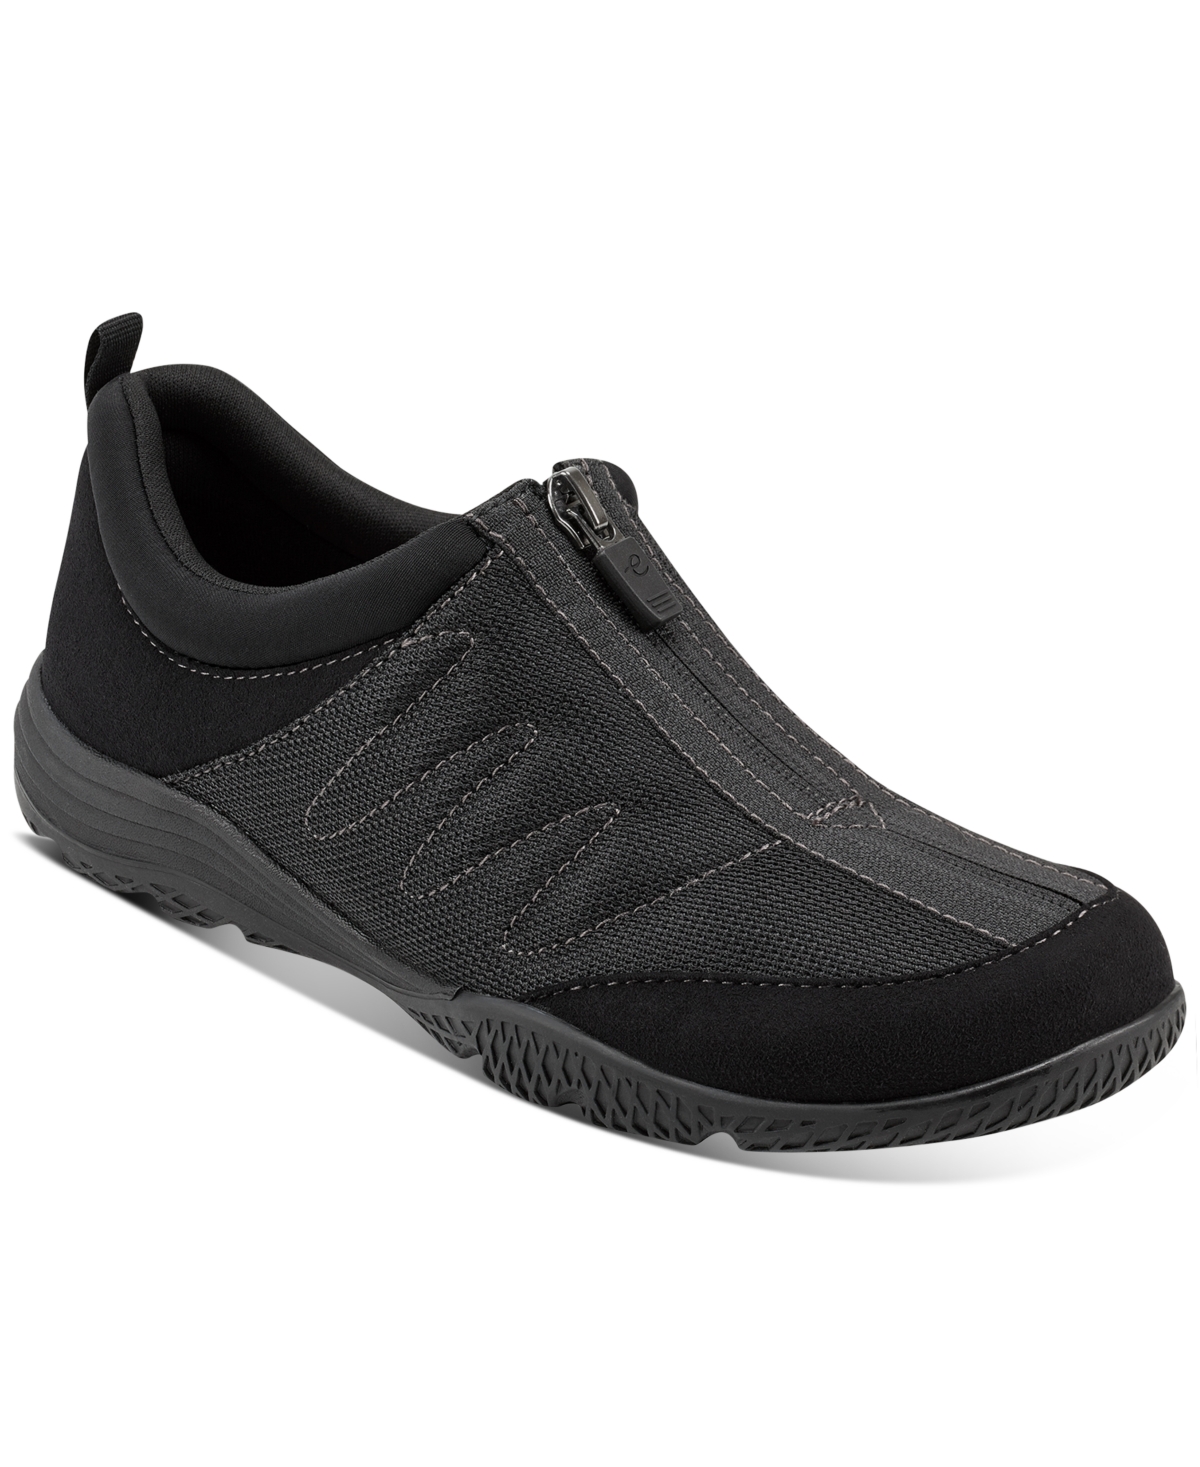 Women's Bestrong Round Toe Casual Sneakers - Black